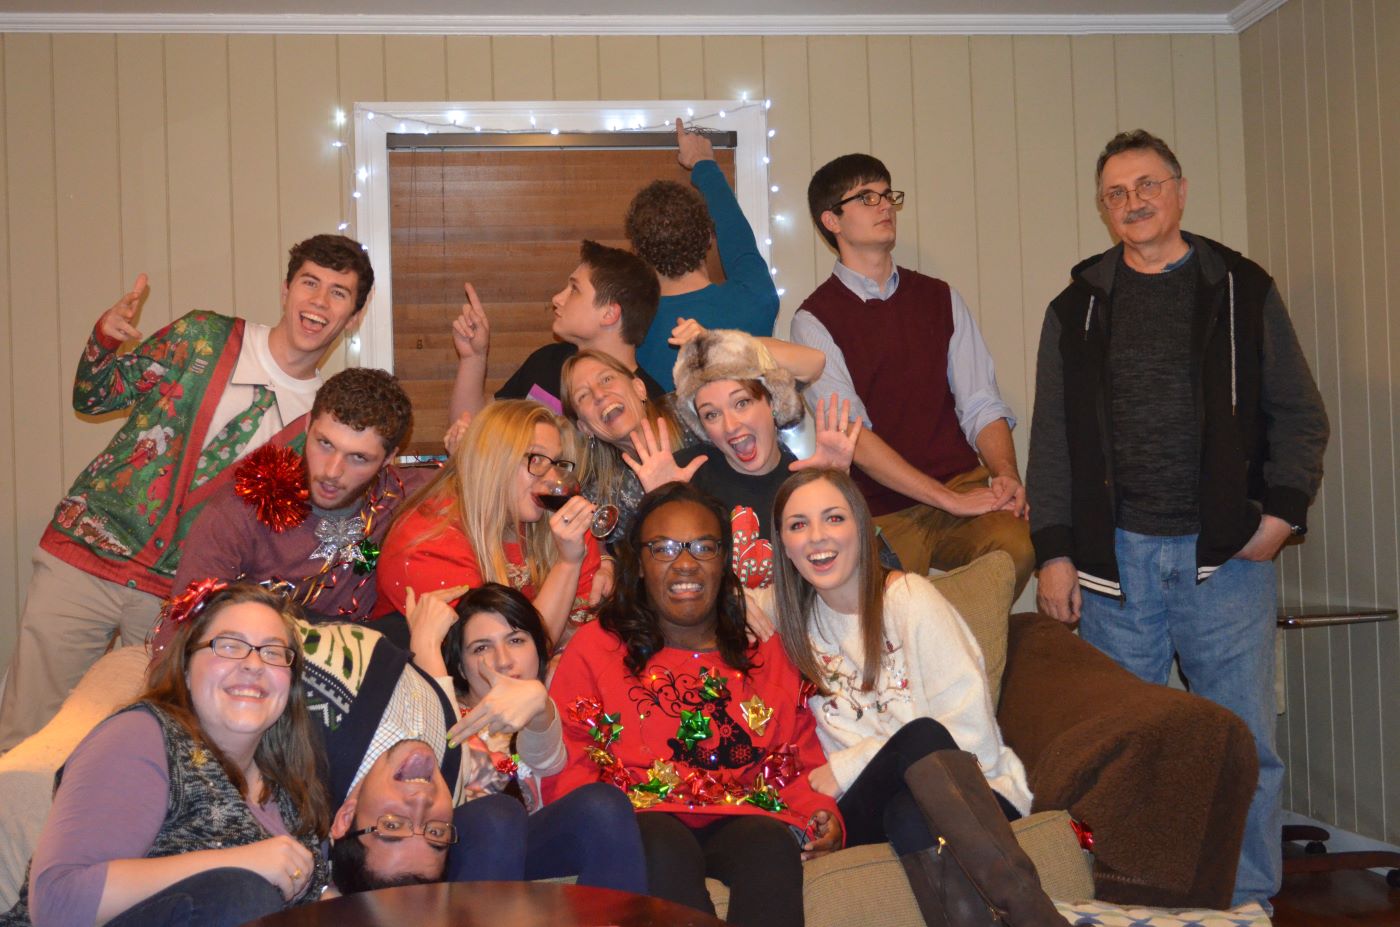 maruska lab holiday party silly group pic